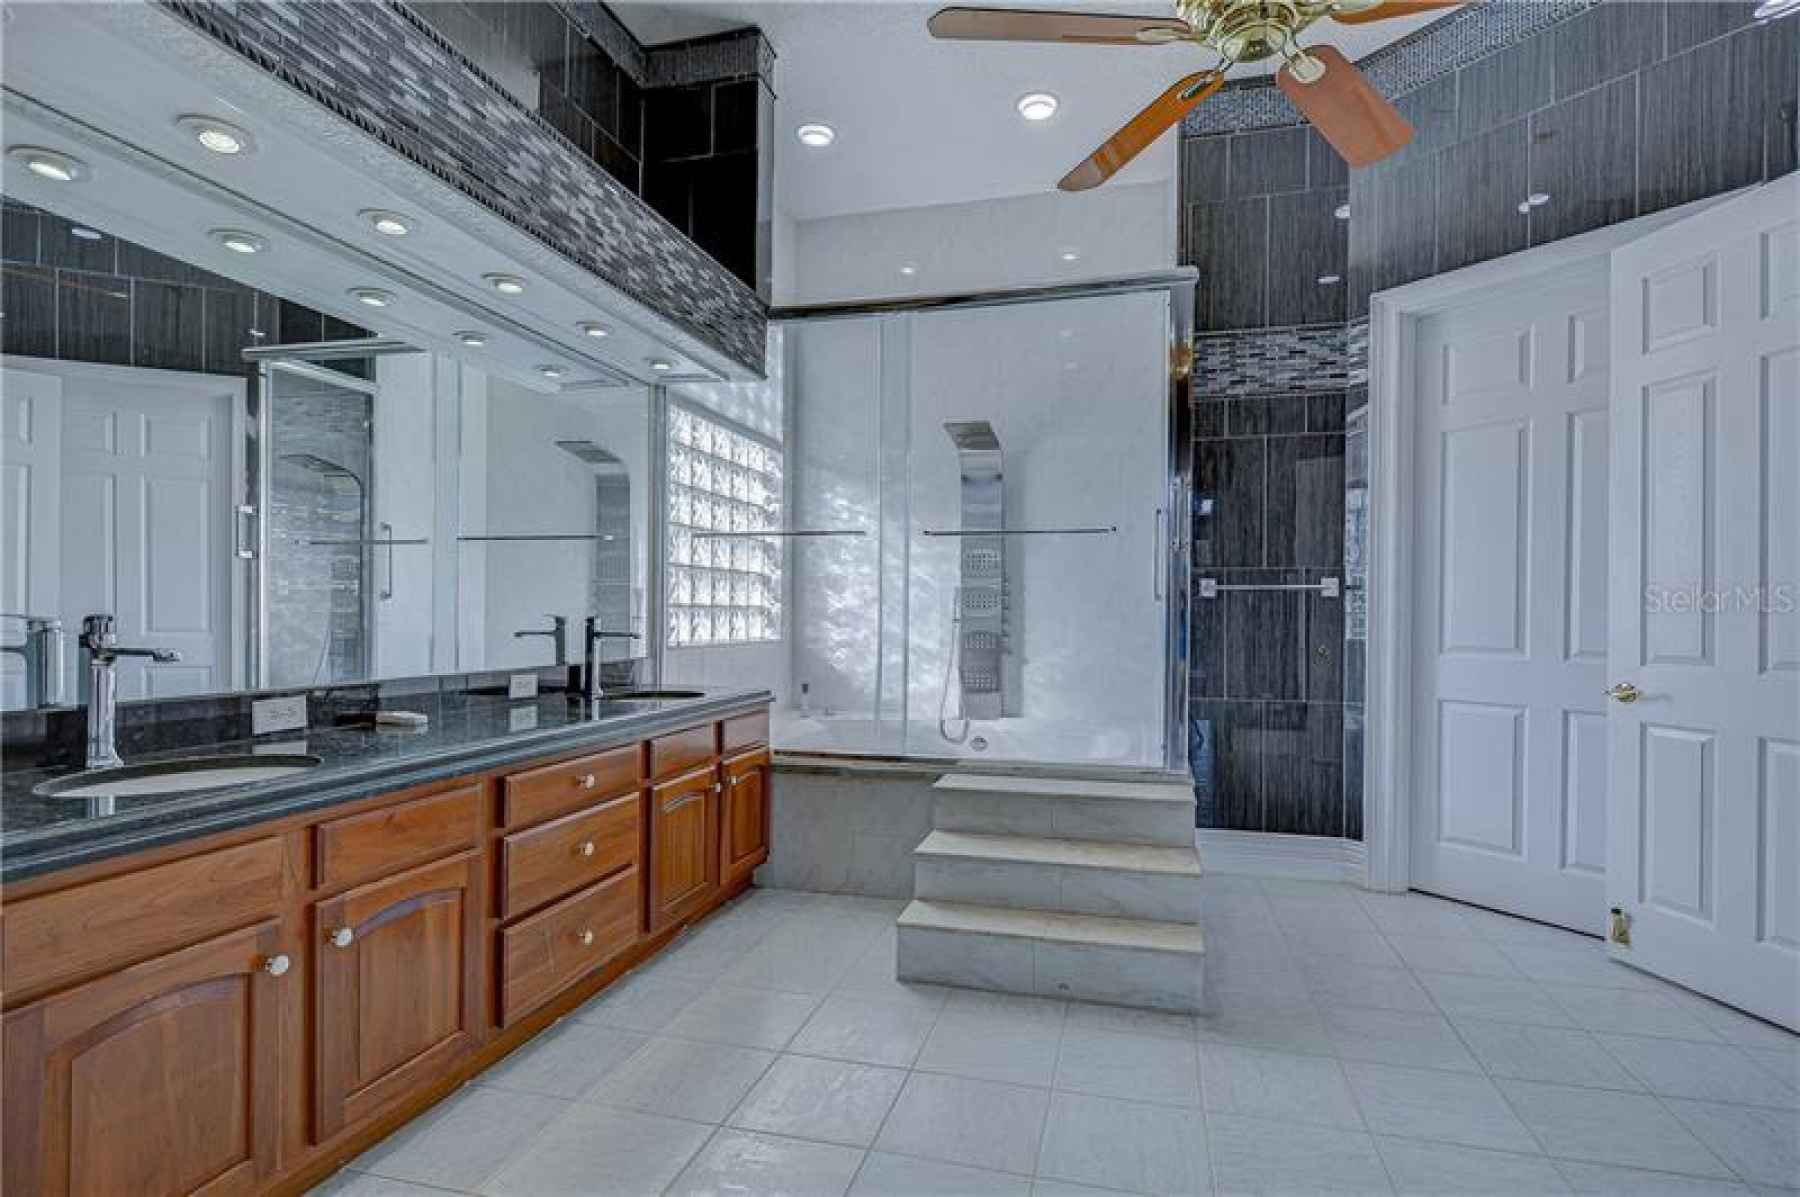 This master bath features his and her sinks as well as STEPS leading up to the walk in shower!